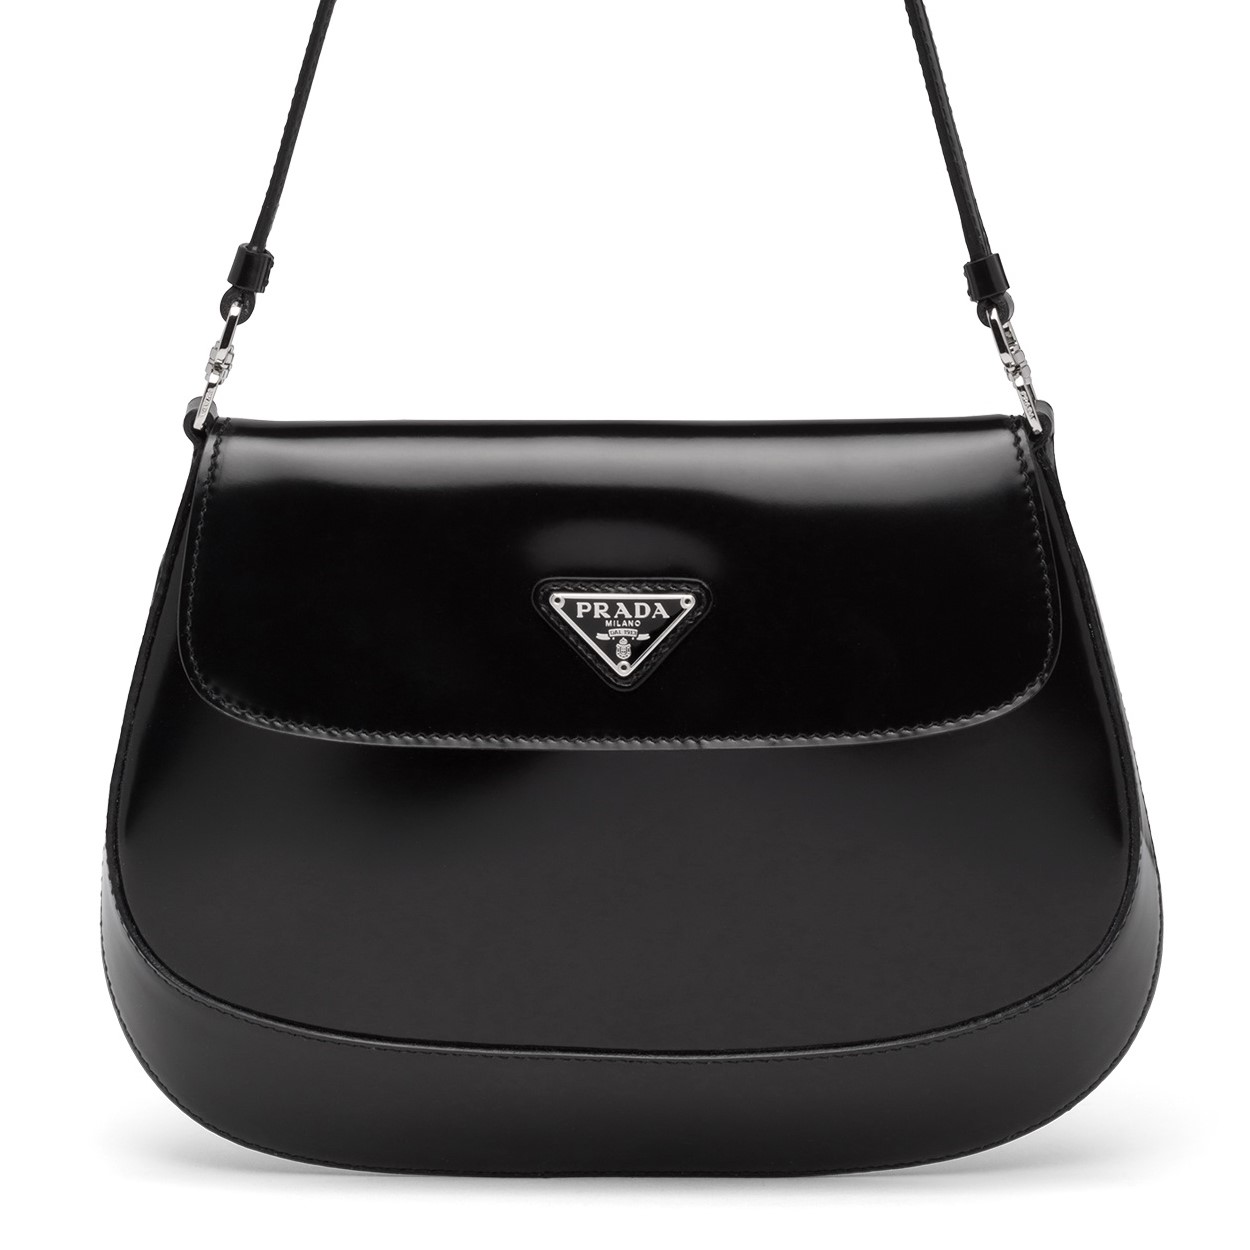 TÚI XÁCH PRADA CLEO BRUSHED LEATHER SHOULDER BAG WITH FLAP 16